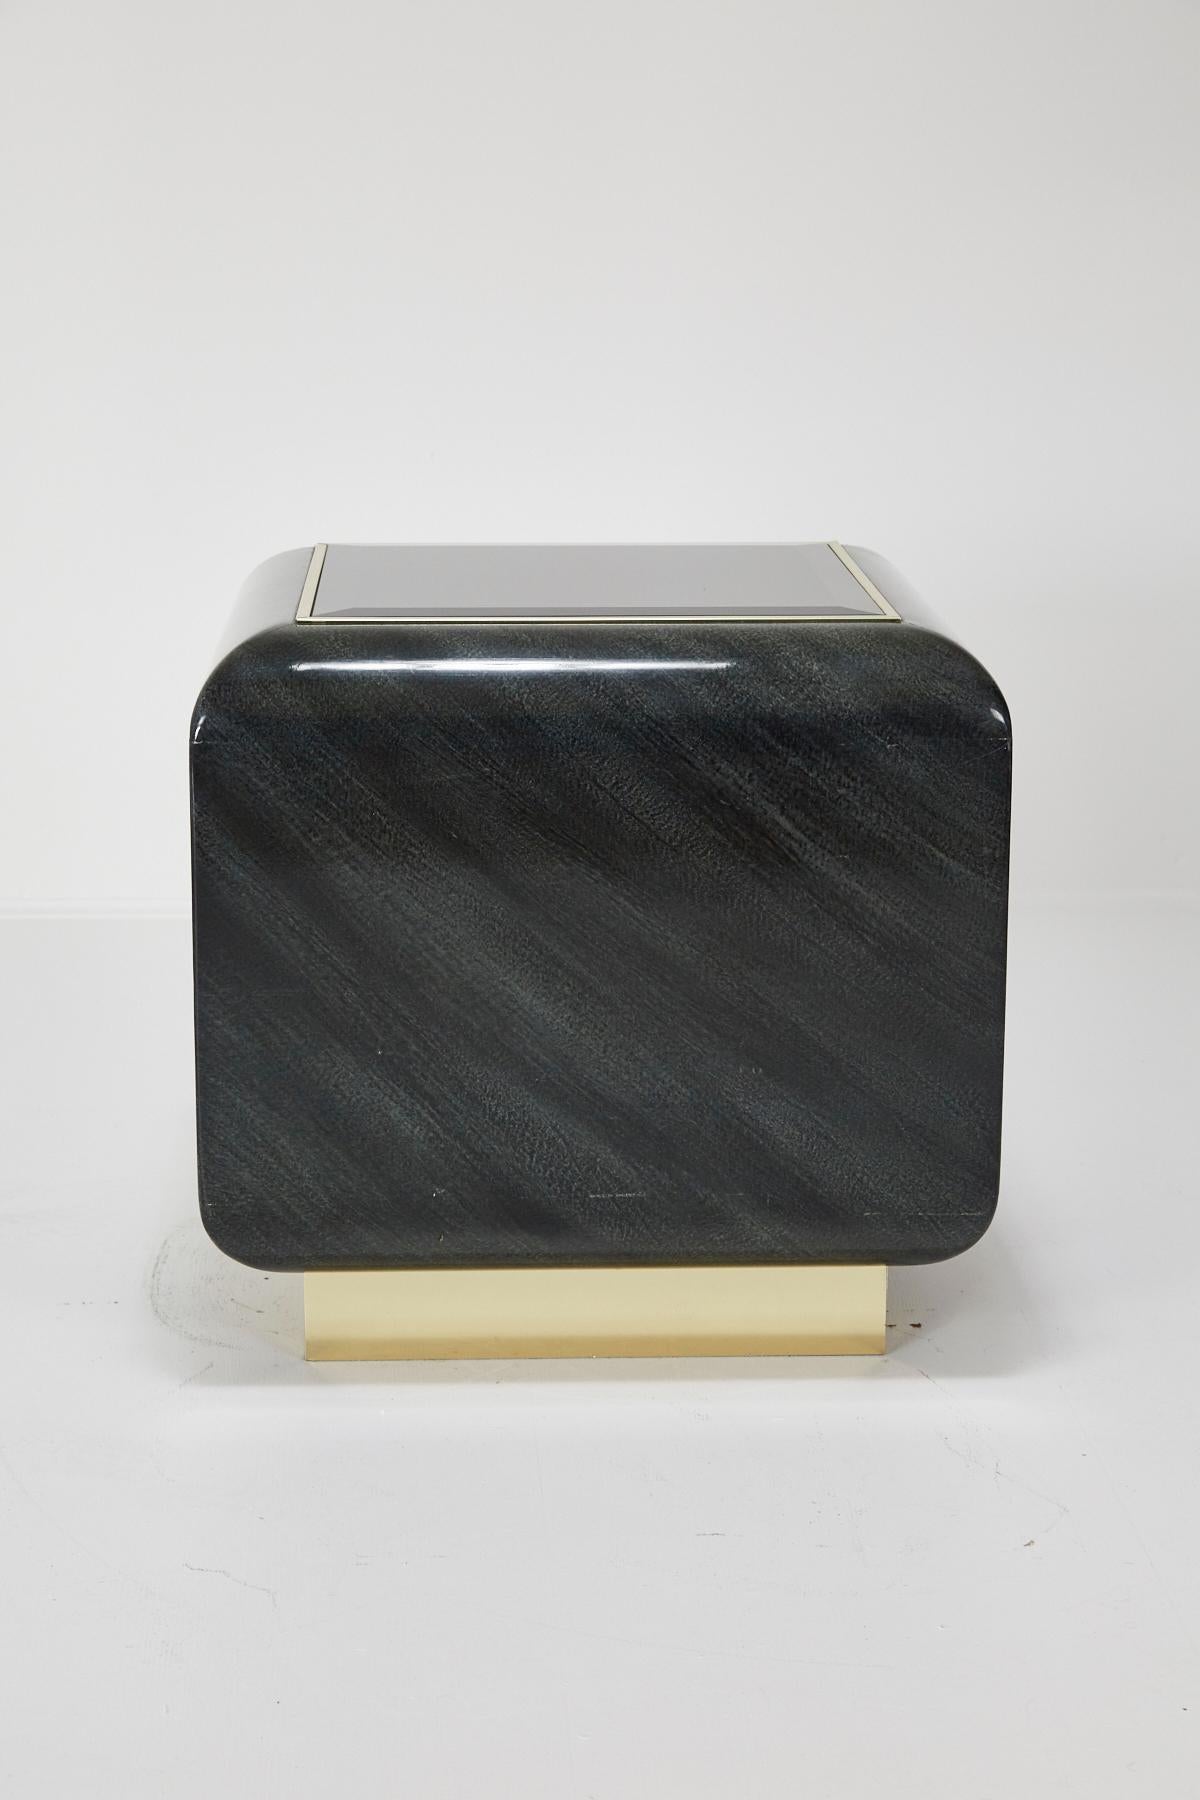 Late 20th Century Patterned Laminate, Brass and Glass Side Table, Style of Steve Chase, circa 1980